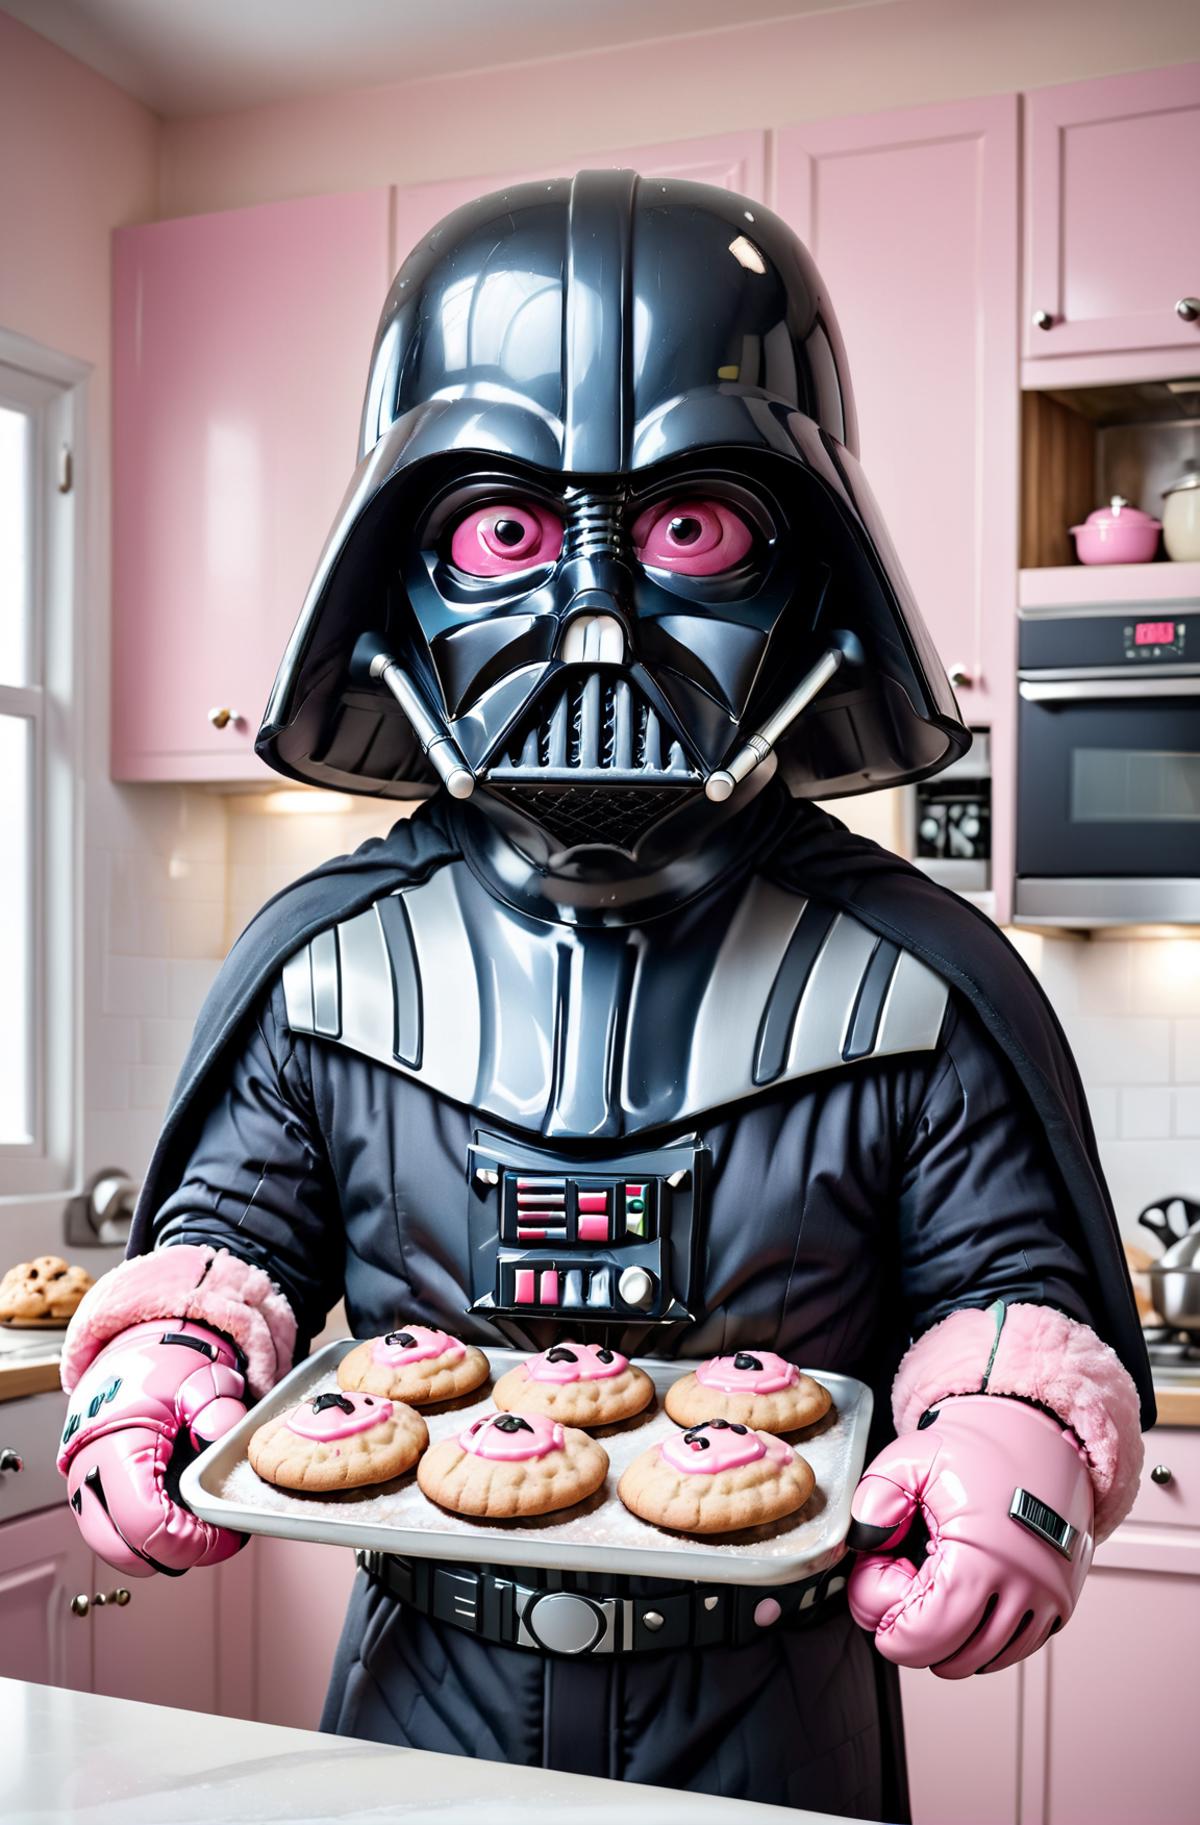 Darth Vader Cookie Monster: A Humorous Star Wars-Inspired Character Holding a Tray of Cookies